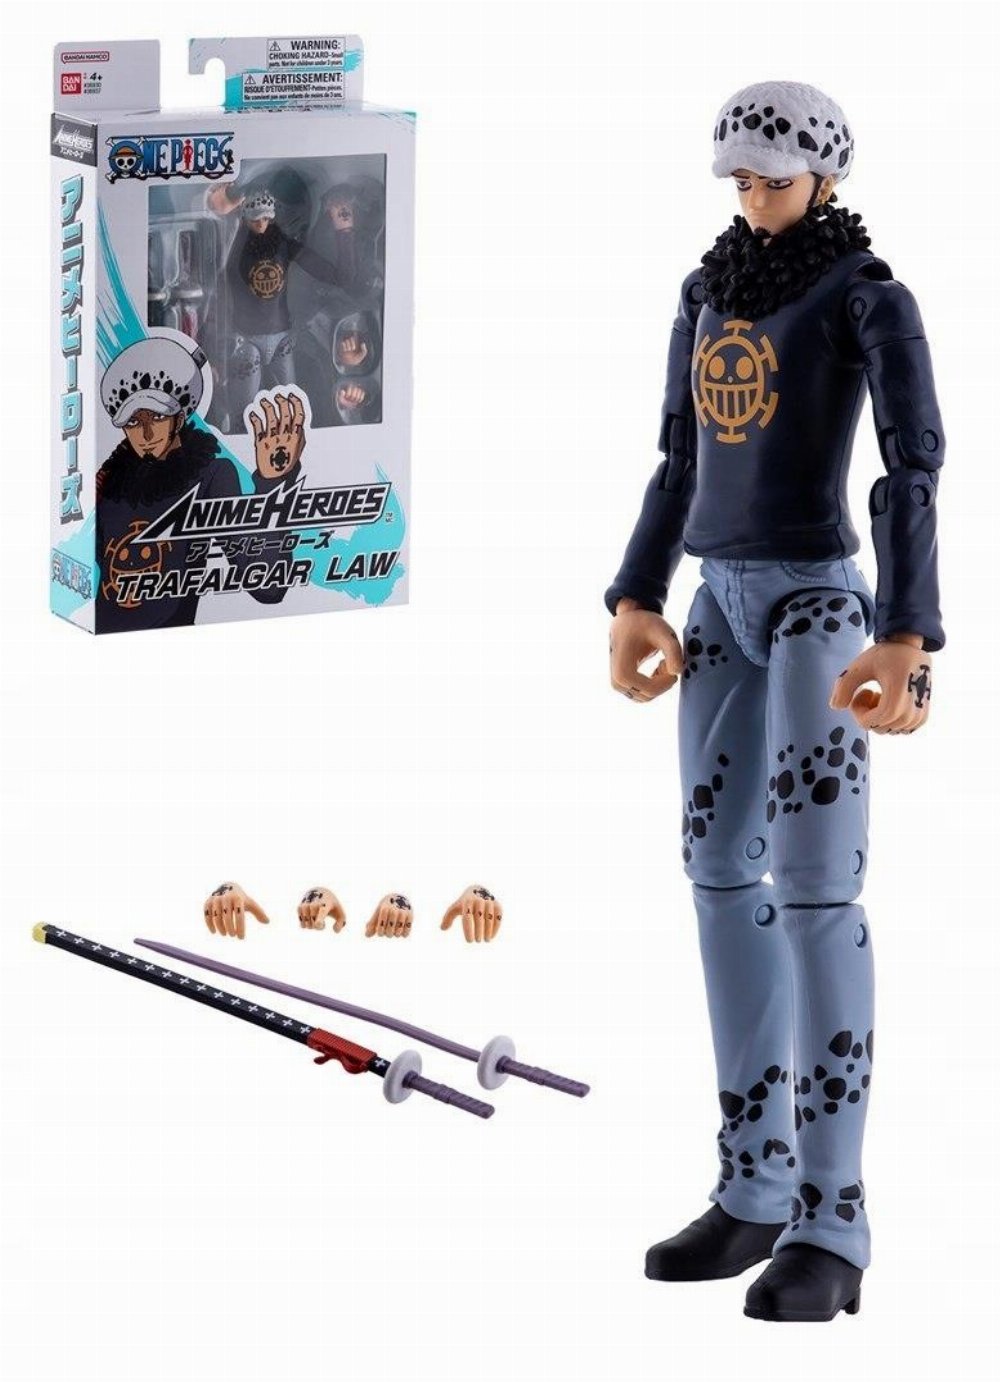 Bandai America Adds One Piece Figures to Anime Heroes Line - The Toy Book